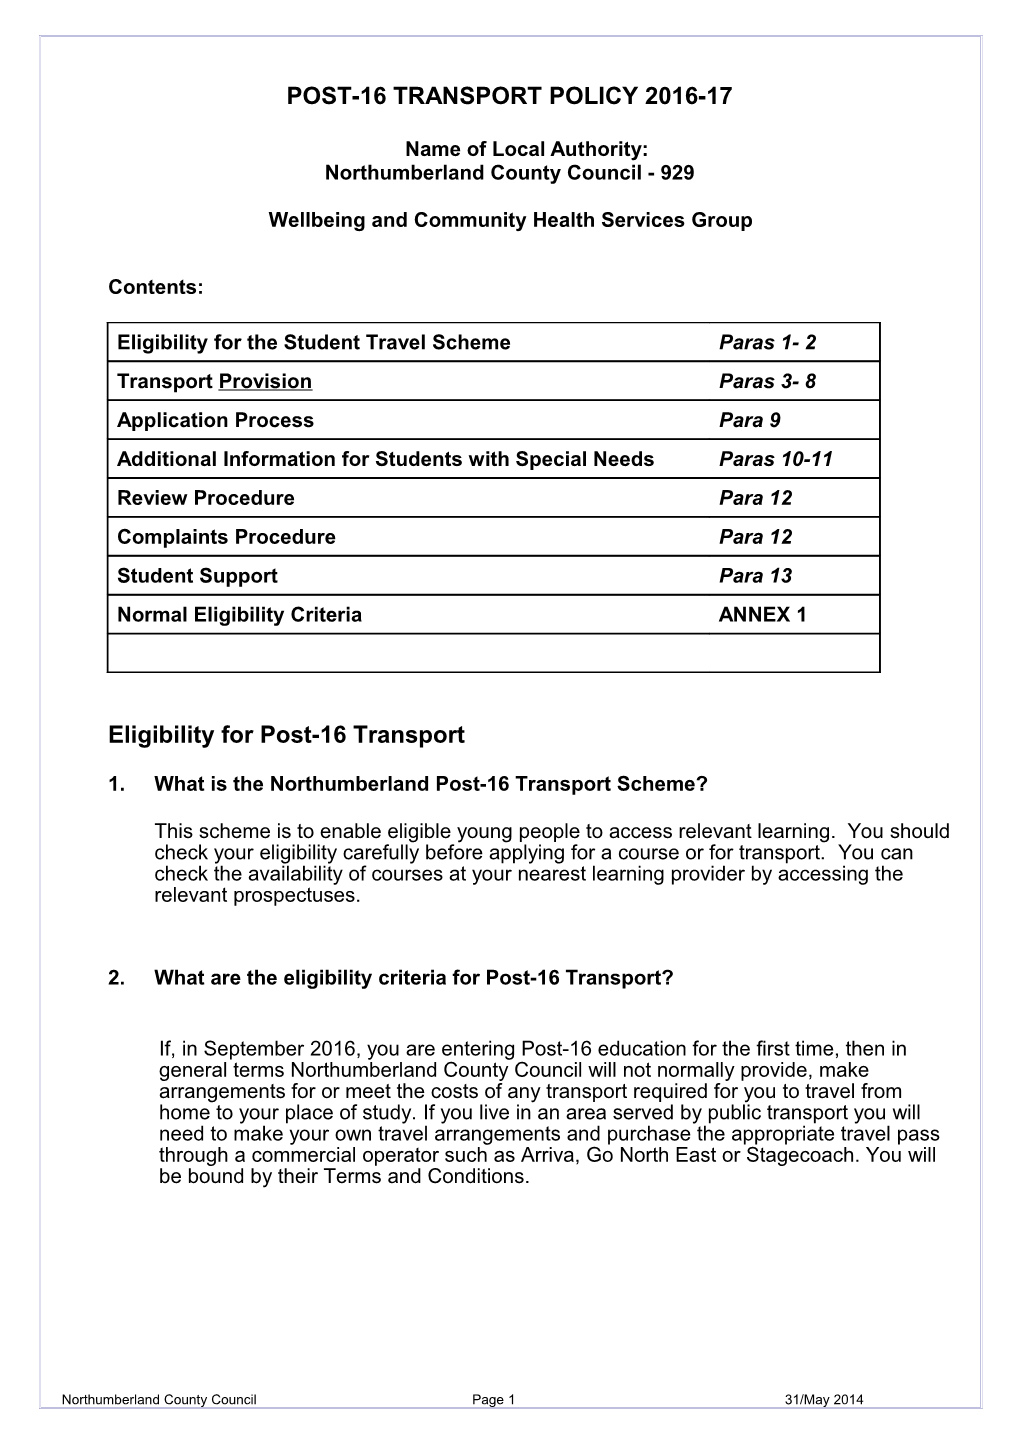 POST 16 Home to School Transport Policy 2012-13